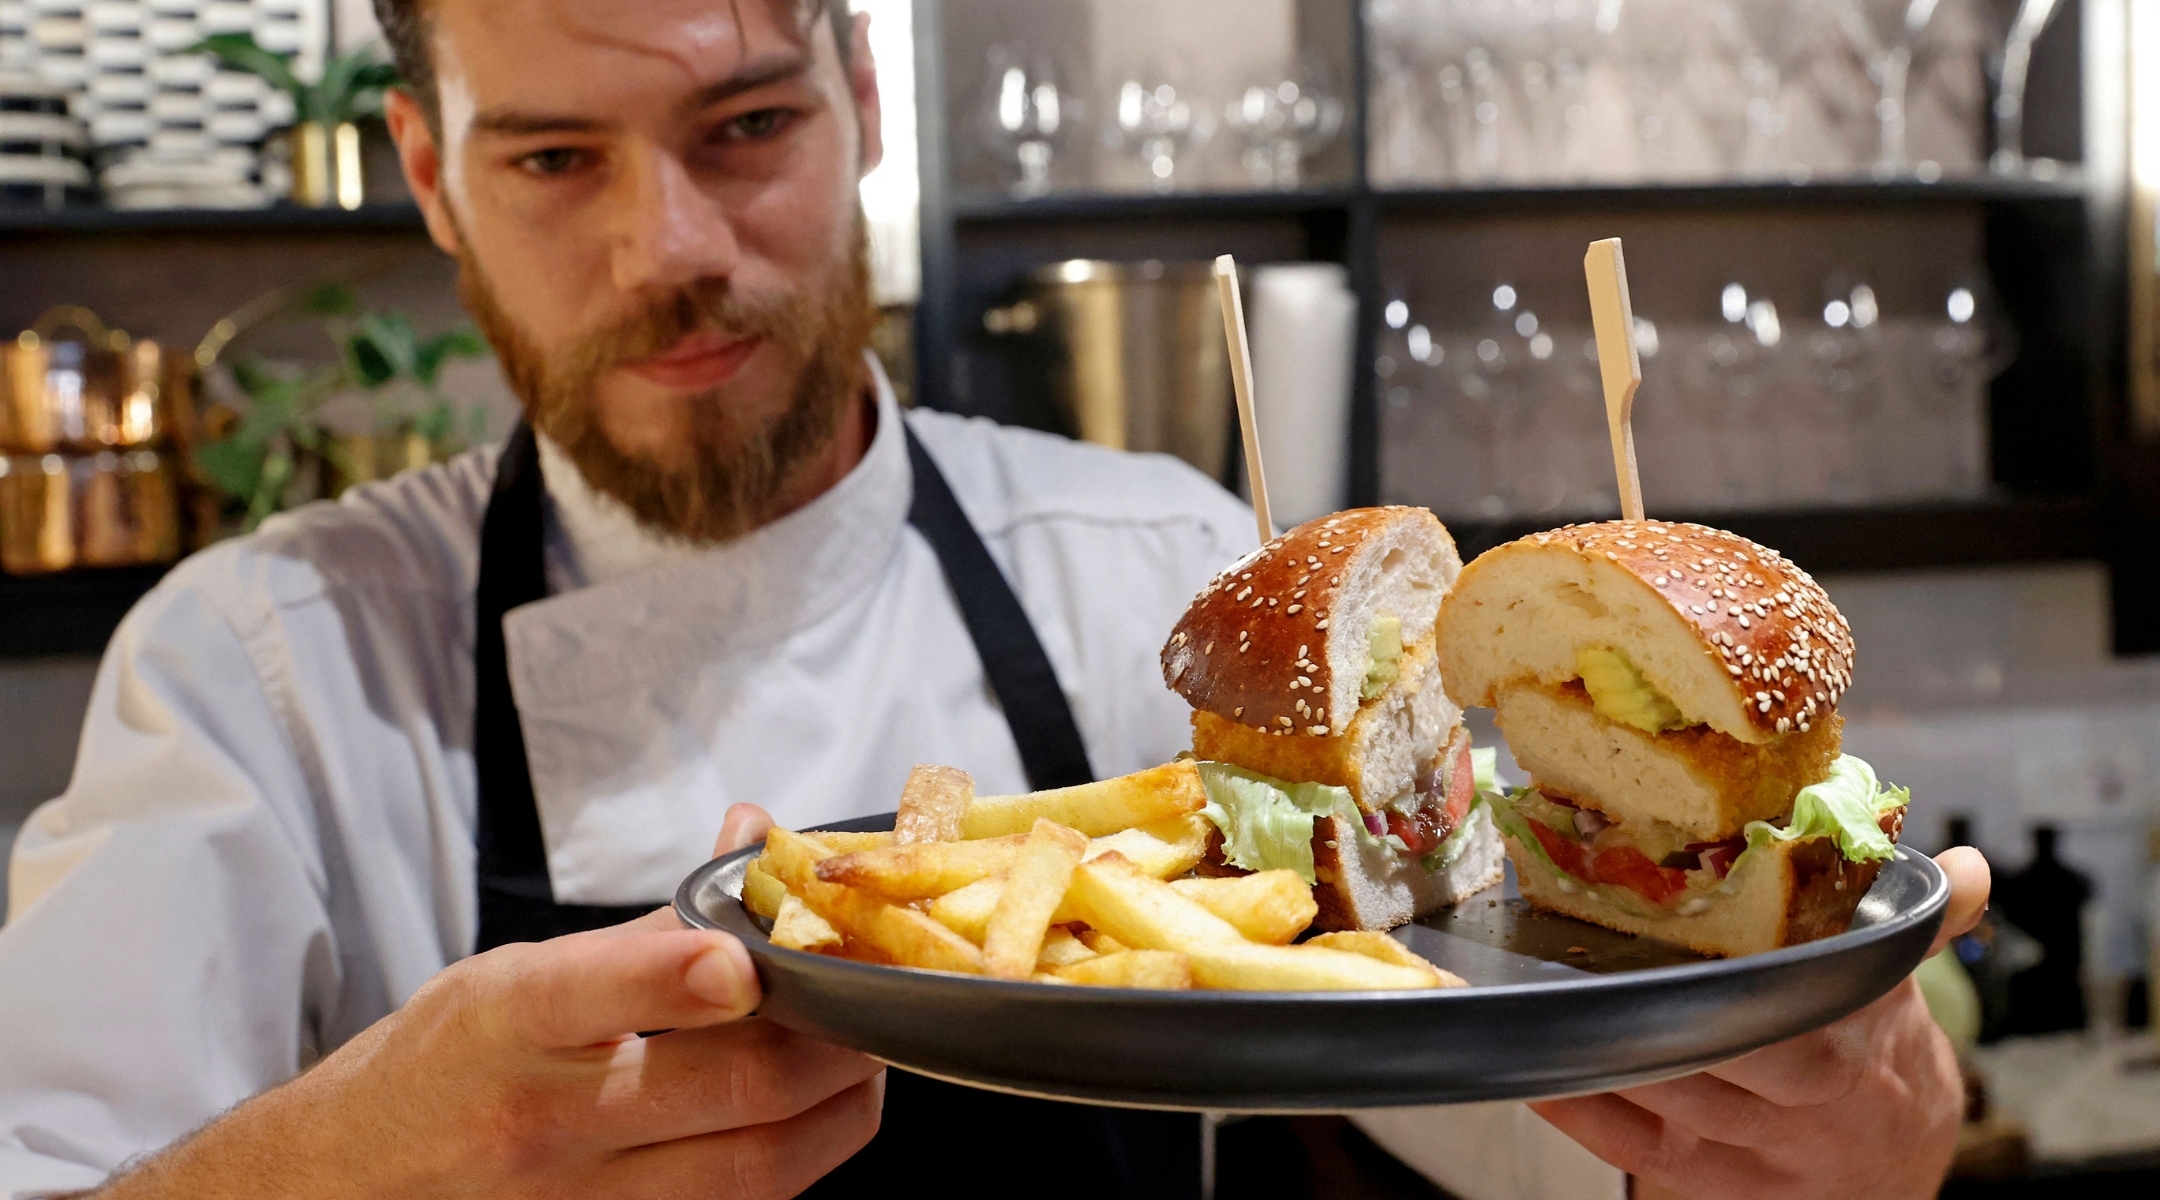 Israeli chef Shachar Yogev serves a burger made with “cultured chicken” meat at The Chicken, SuperMeat’s restaurant adjacent to their production site in the Israeli town of Ness Ziona on June 18, 2021. (Photo by JACK GUEZ/AFP via Getty Images)